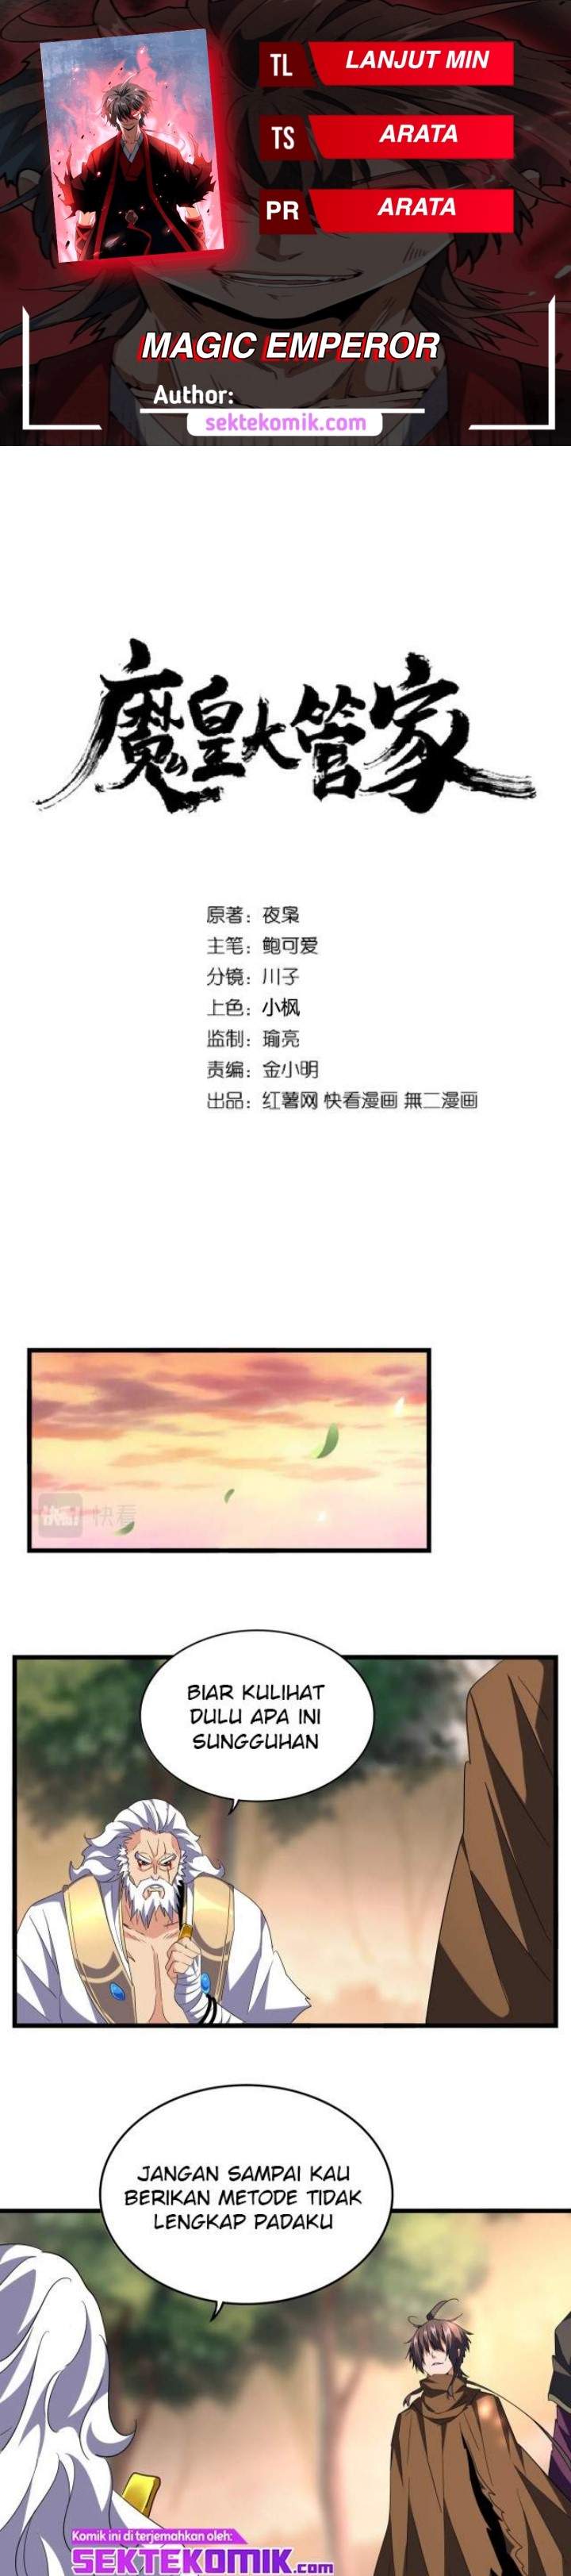 Magic Emperor Chapter 217 Image 0